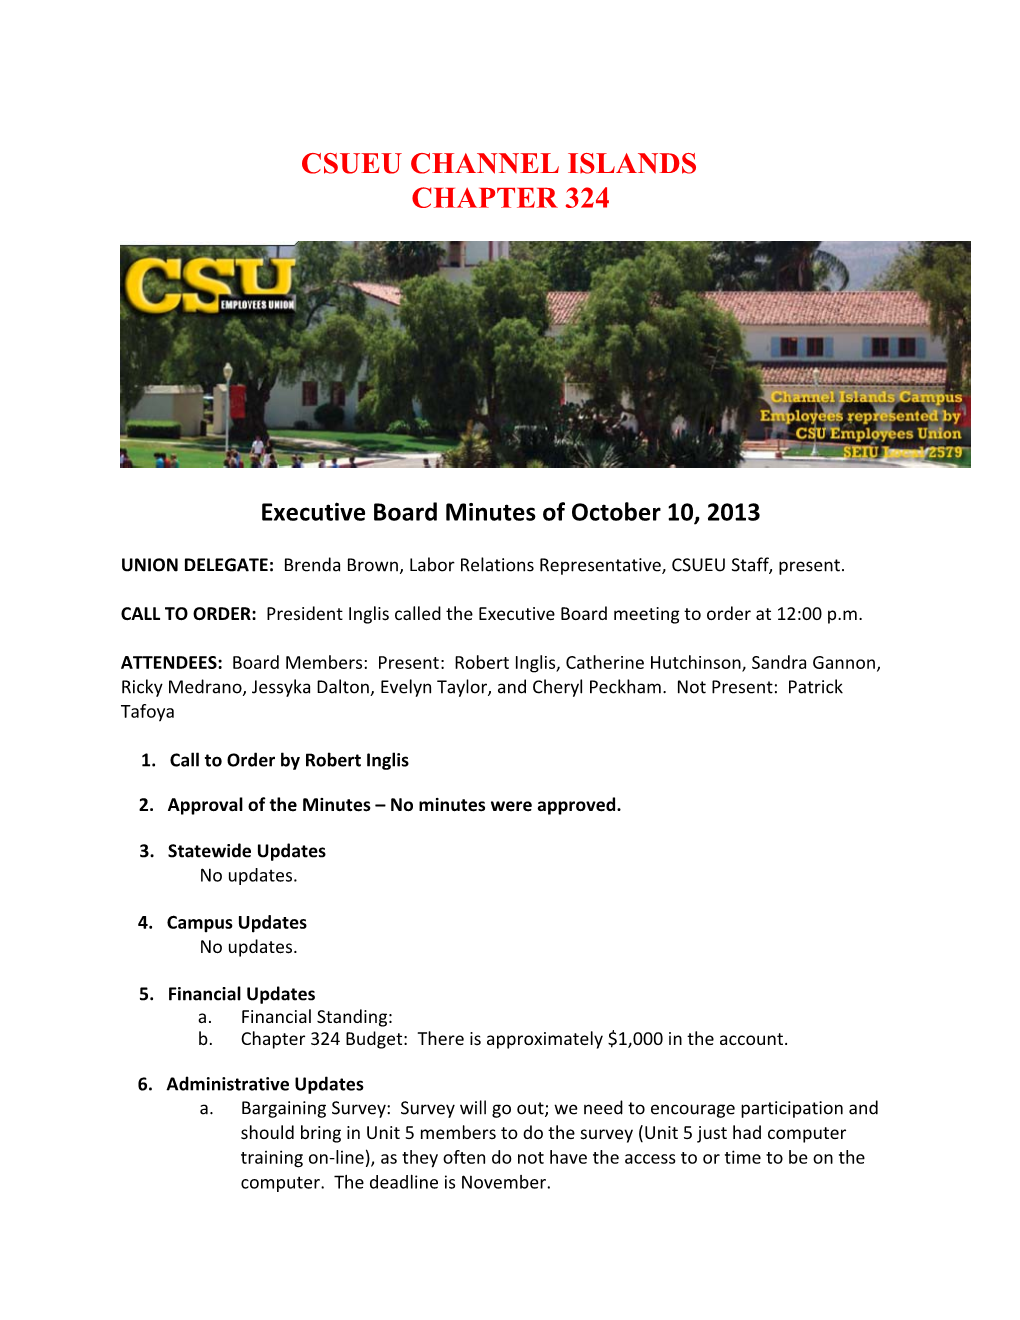 Executive Board Minutes of October 10, 2013